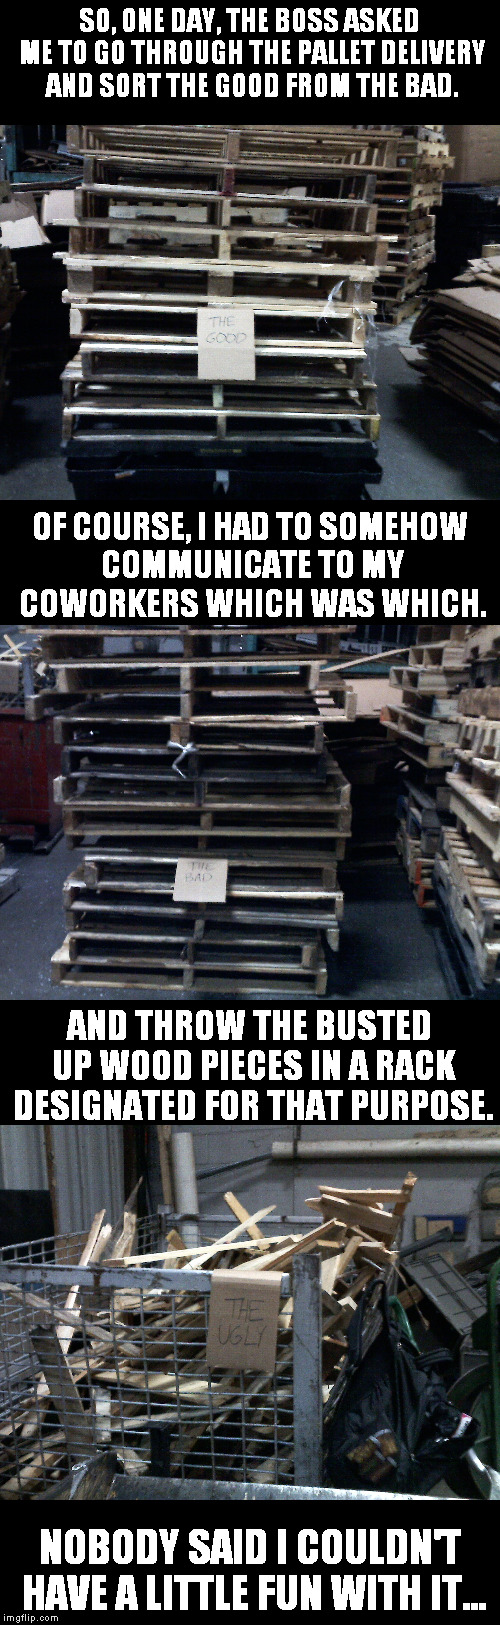 Wouldn't you do the same? | SO, ONE DAY, THE BOSS ASKED ME TO GO THROUGH THE PALLET DELIVERY AND SORT THE GOOD FROM THE BAD. OF COURSE, I HAD TO SOMEHOW COMMUNICATE TO MY COWORKERS WHICH WAS WHICH. AND THROW THE BUSTED UP WOOD PIECES IN A RACK DESIGNATED FOR THAT PURPOSE. NOBODY SAID I COULDN'T HAVE A LITTLE FUN WITH IT... | image tagged in memes,work,the good,the bad,the ugly | made w/ Imgflip meme maker